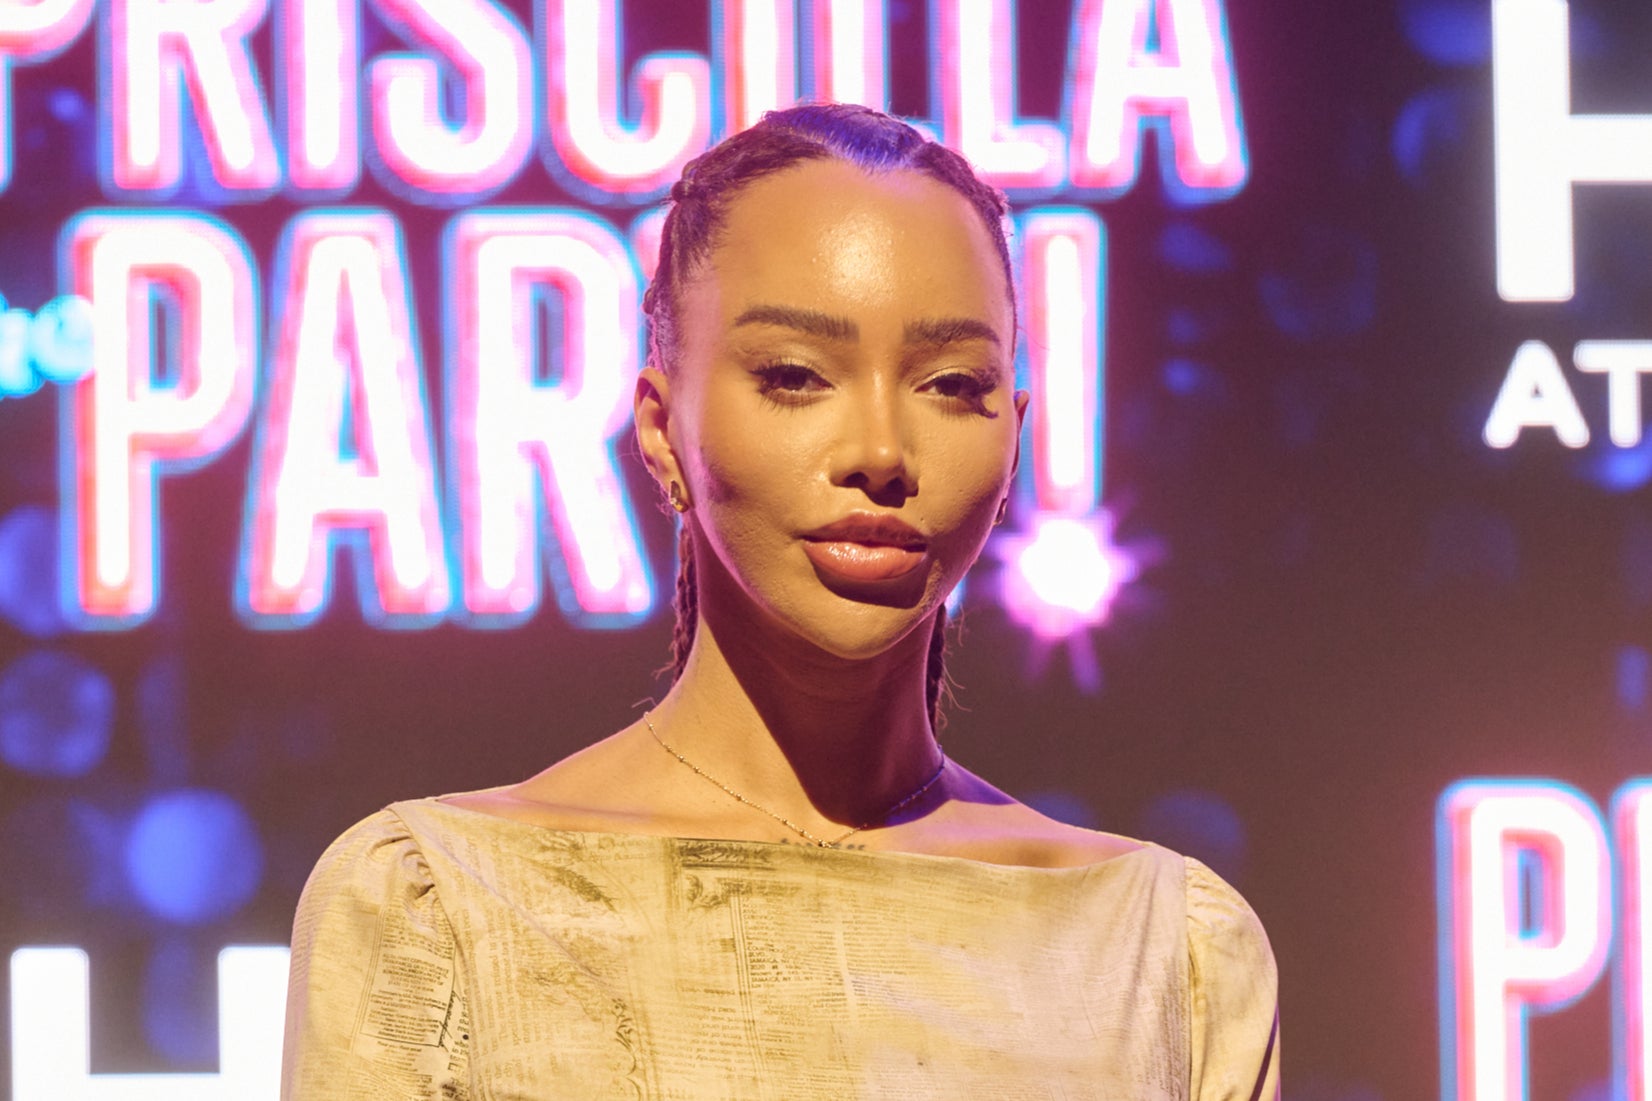 Munroe Bergdorf at the launch of Priscilla The Party